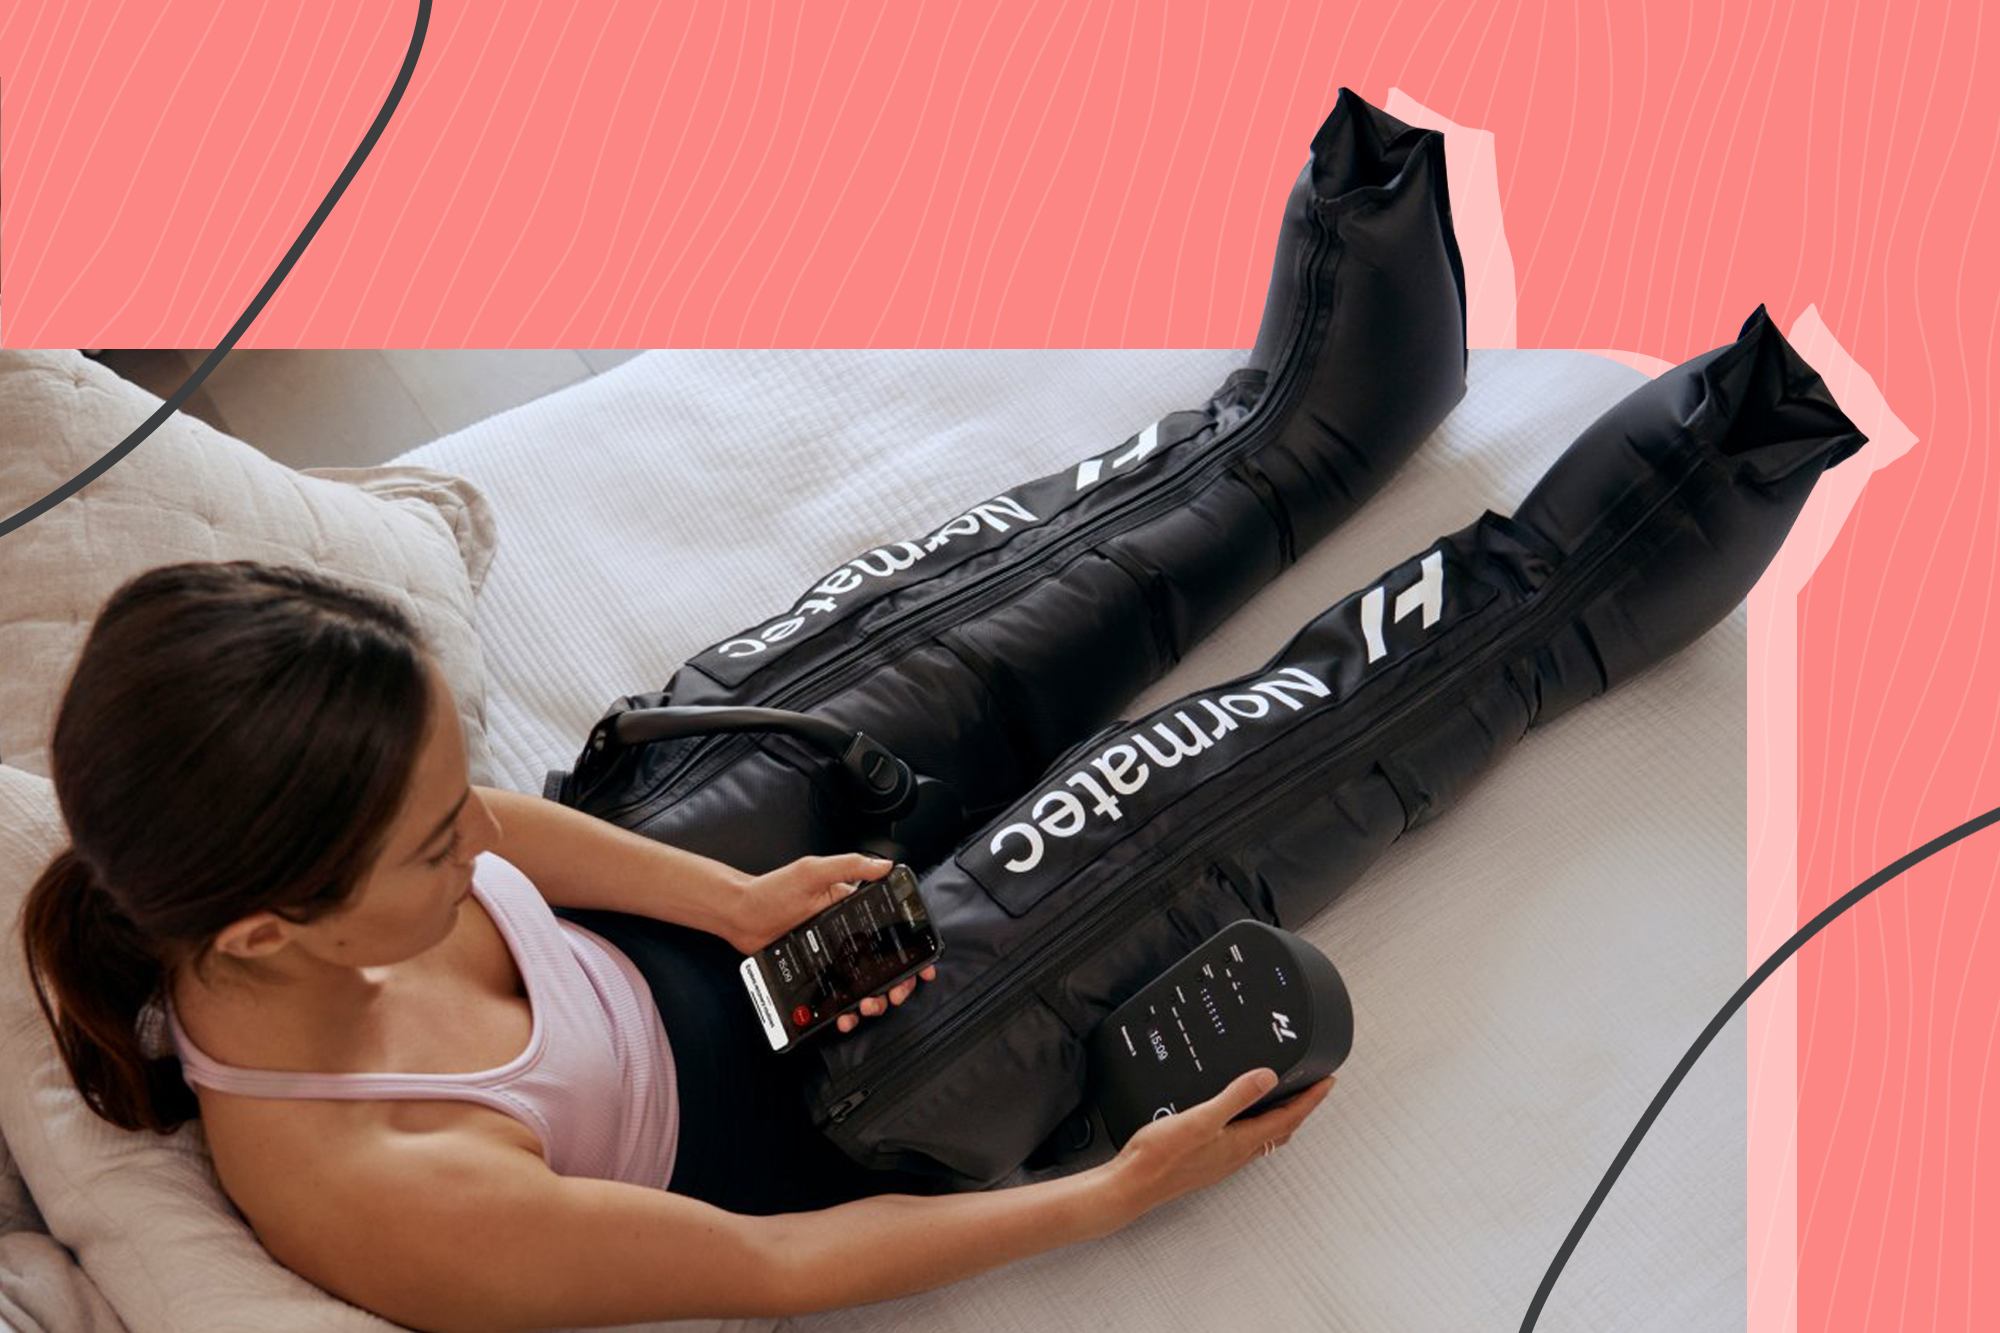 NORMATEC compression system can help with your injury recovery